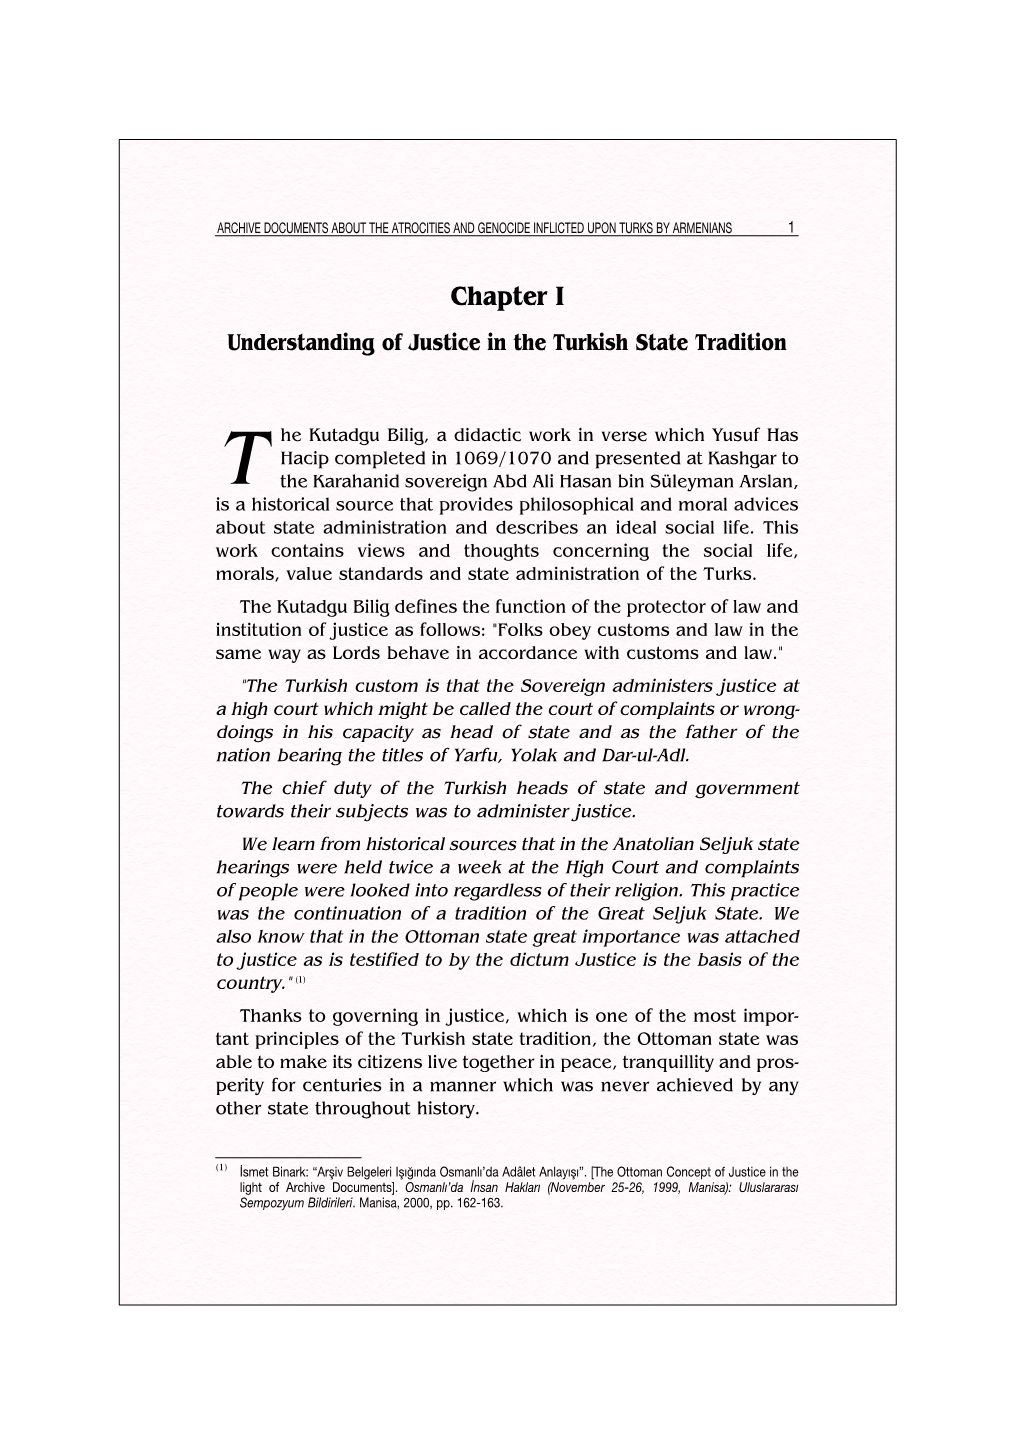 Chapter I Understanding of Justice in the Turkish State Tradition